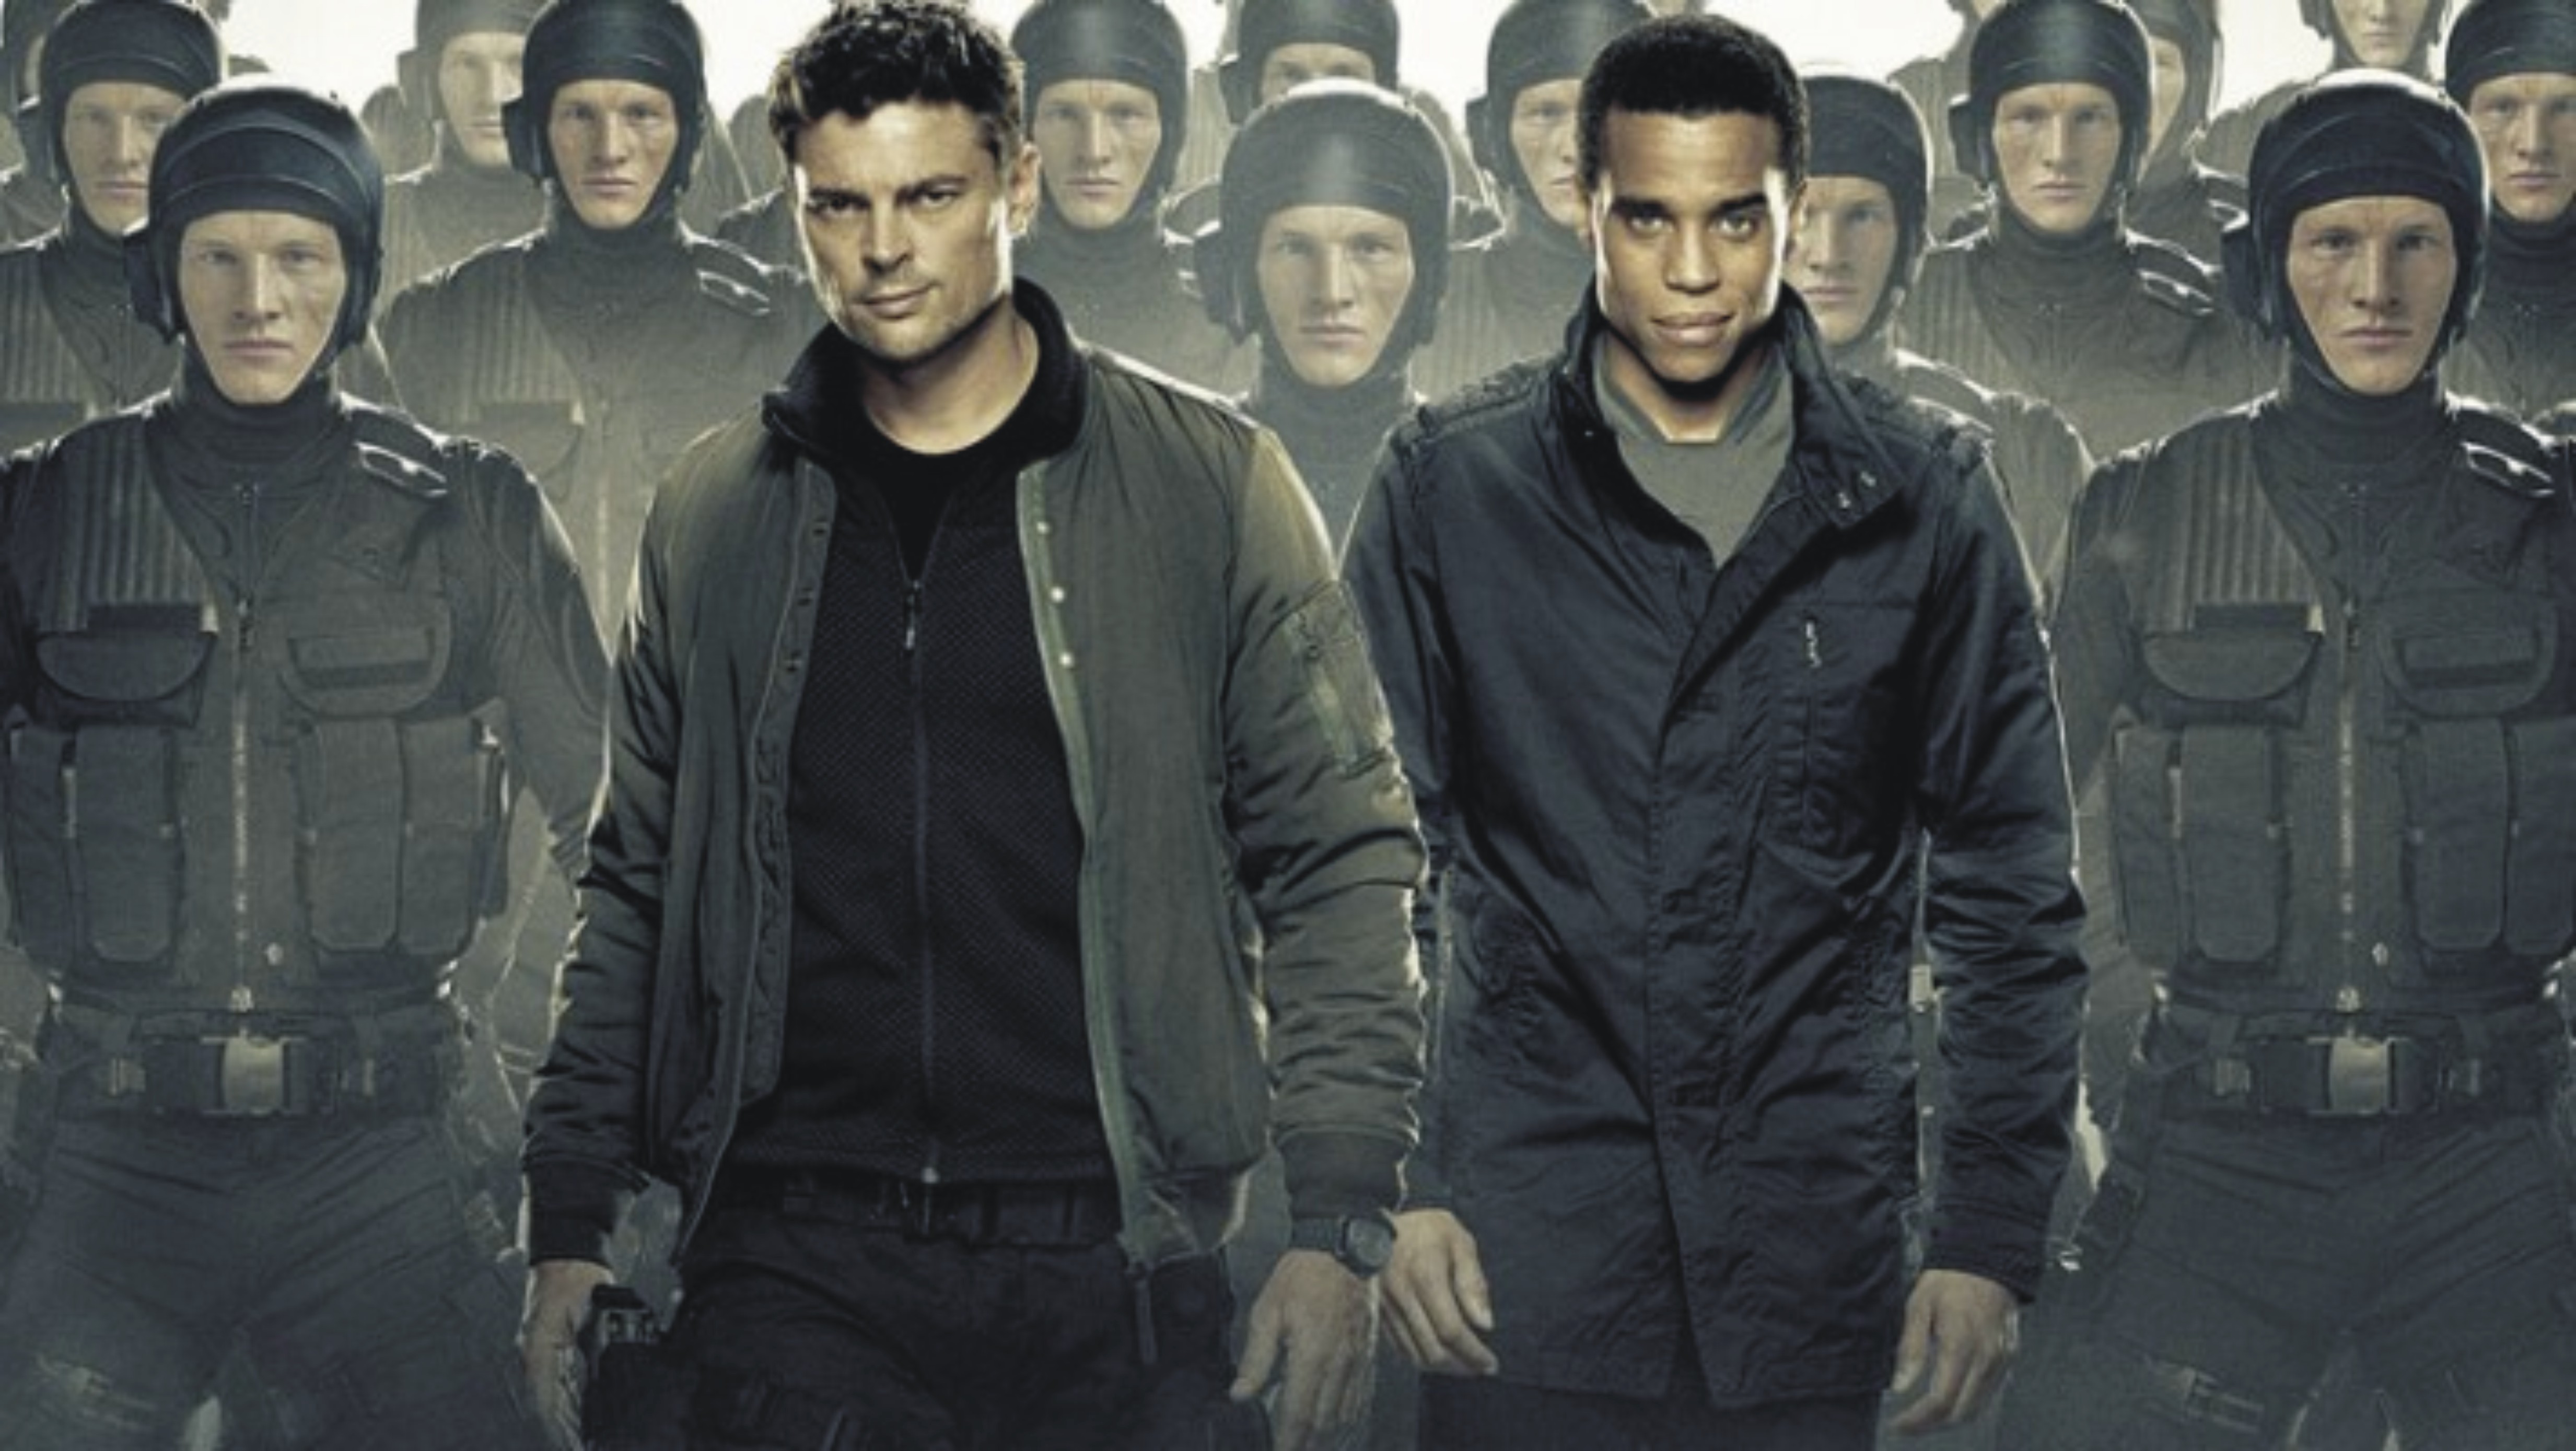 TV Show Almost Human HD Wallpaper | Background Image